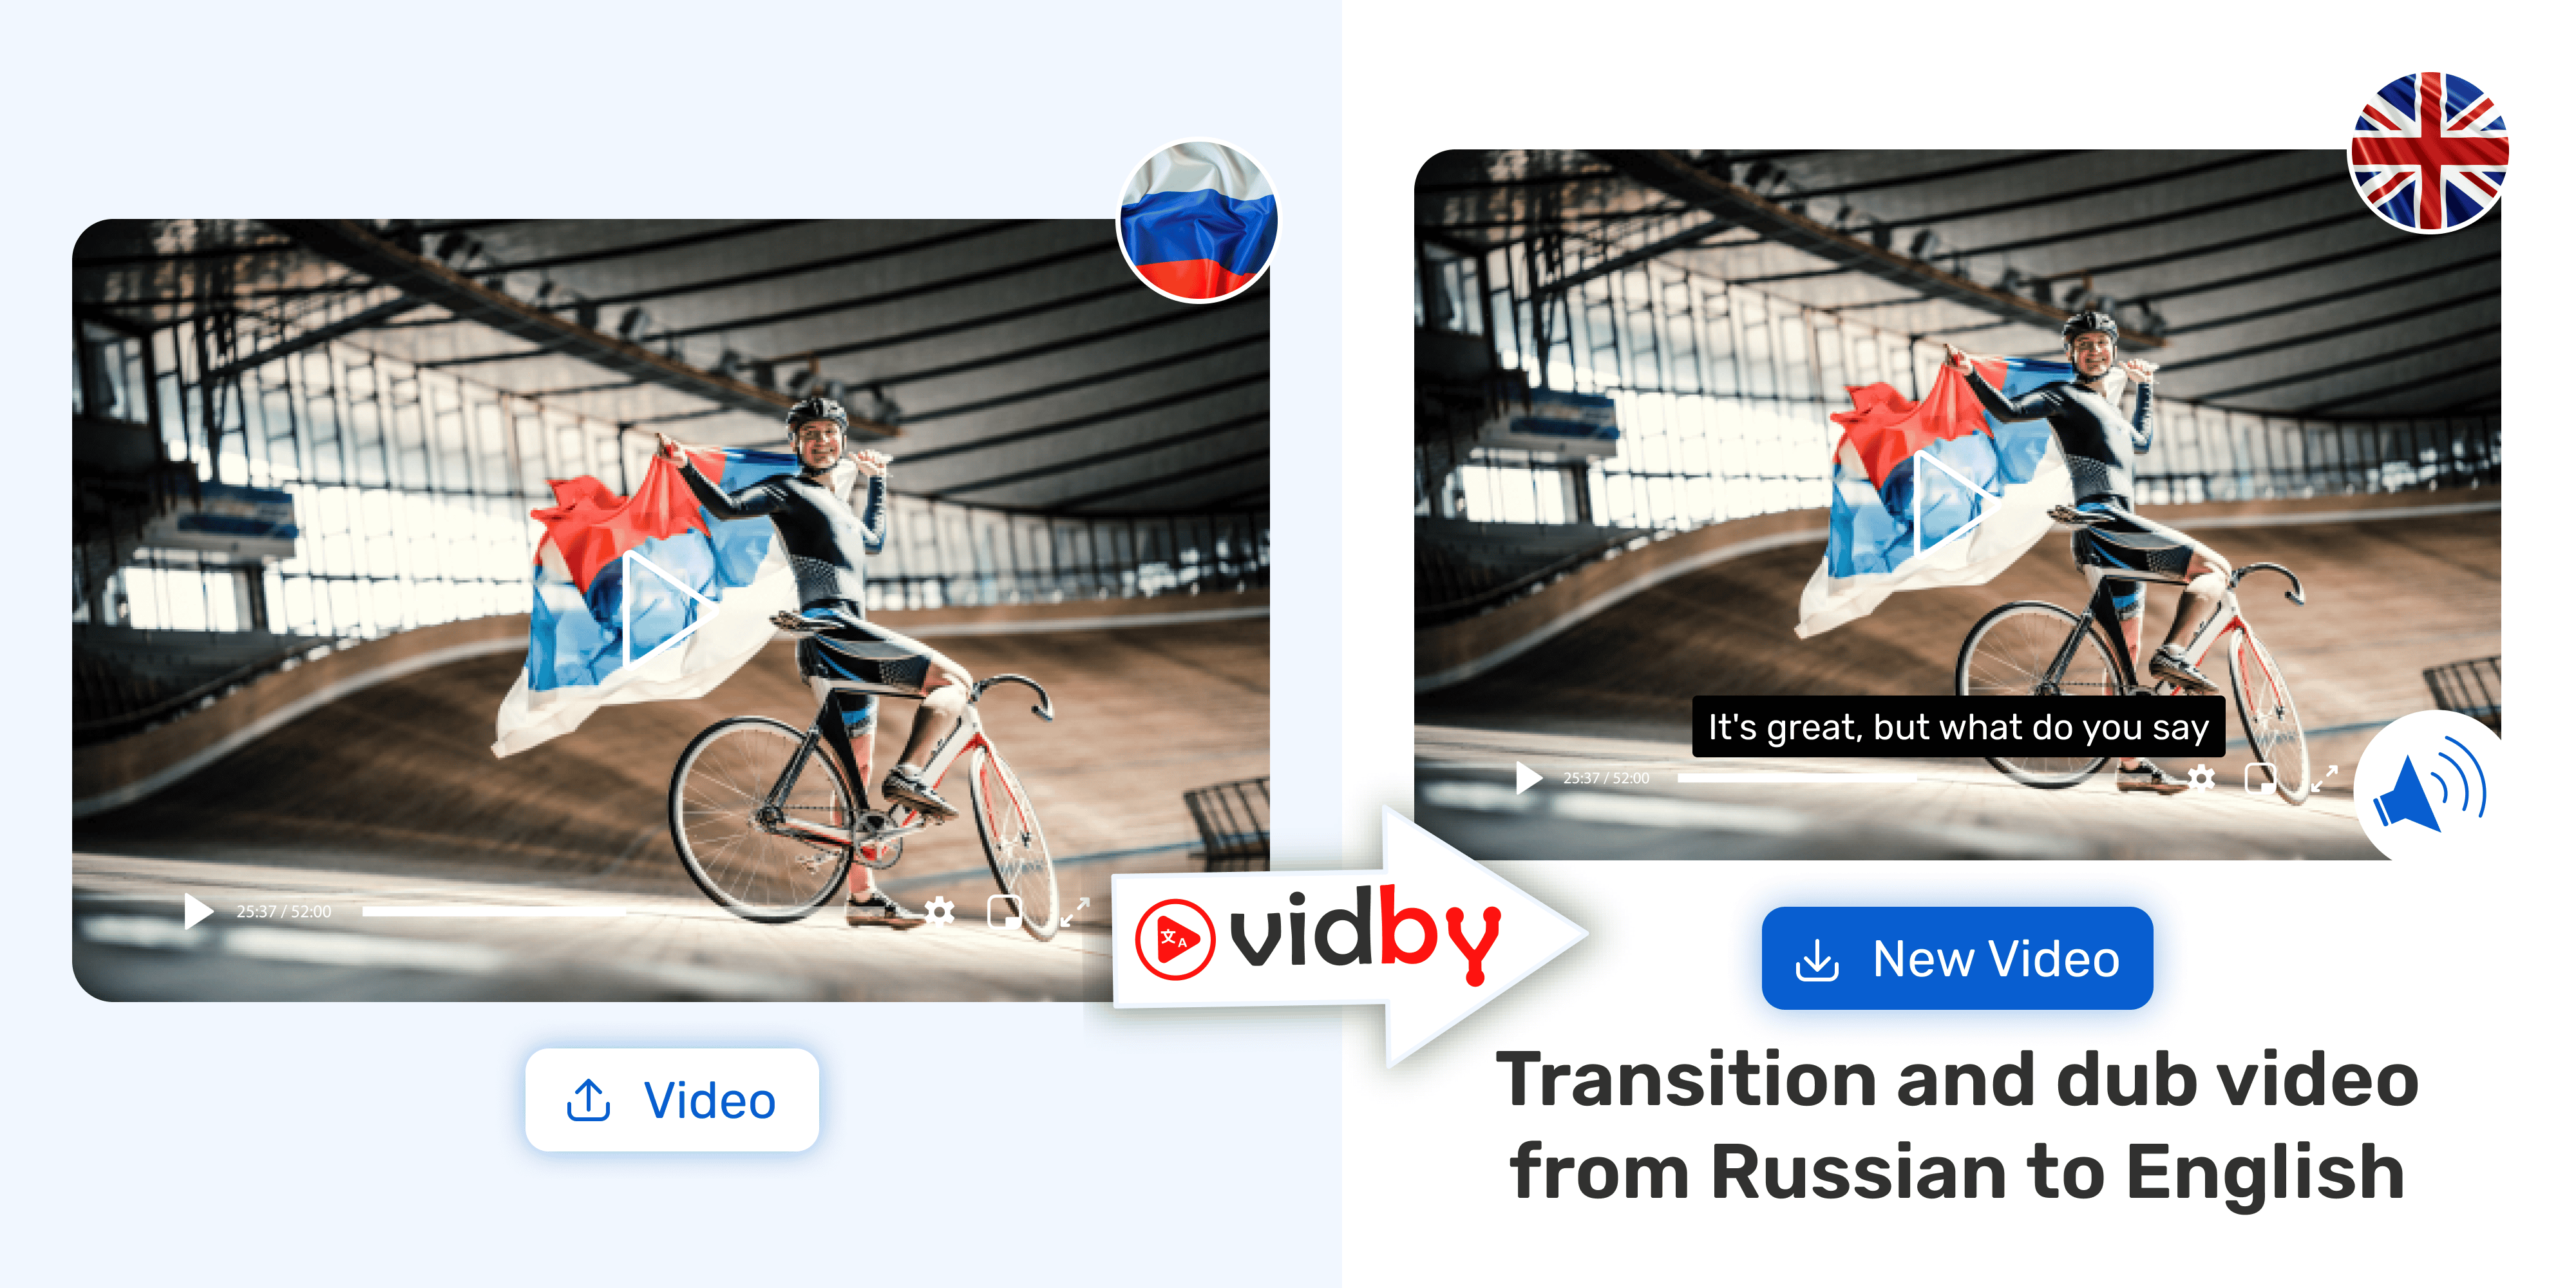 Translation of your video from Russian into English in the Vidby service